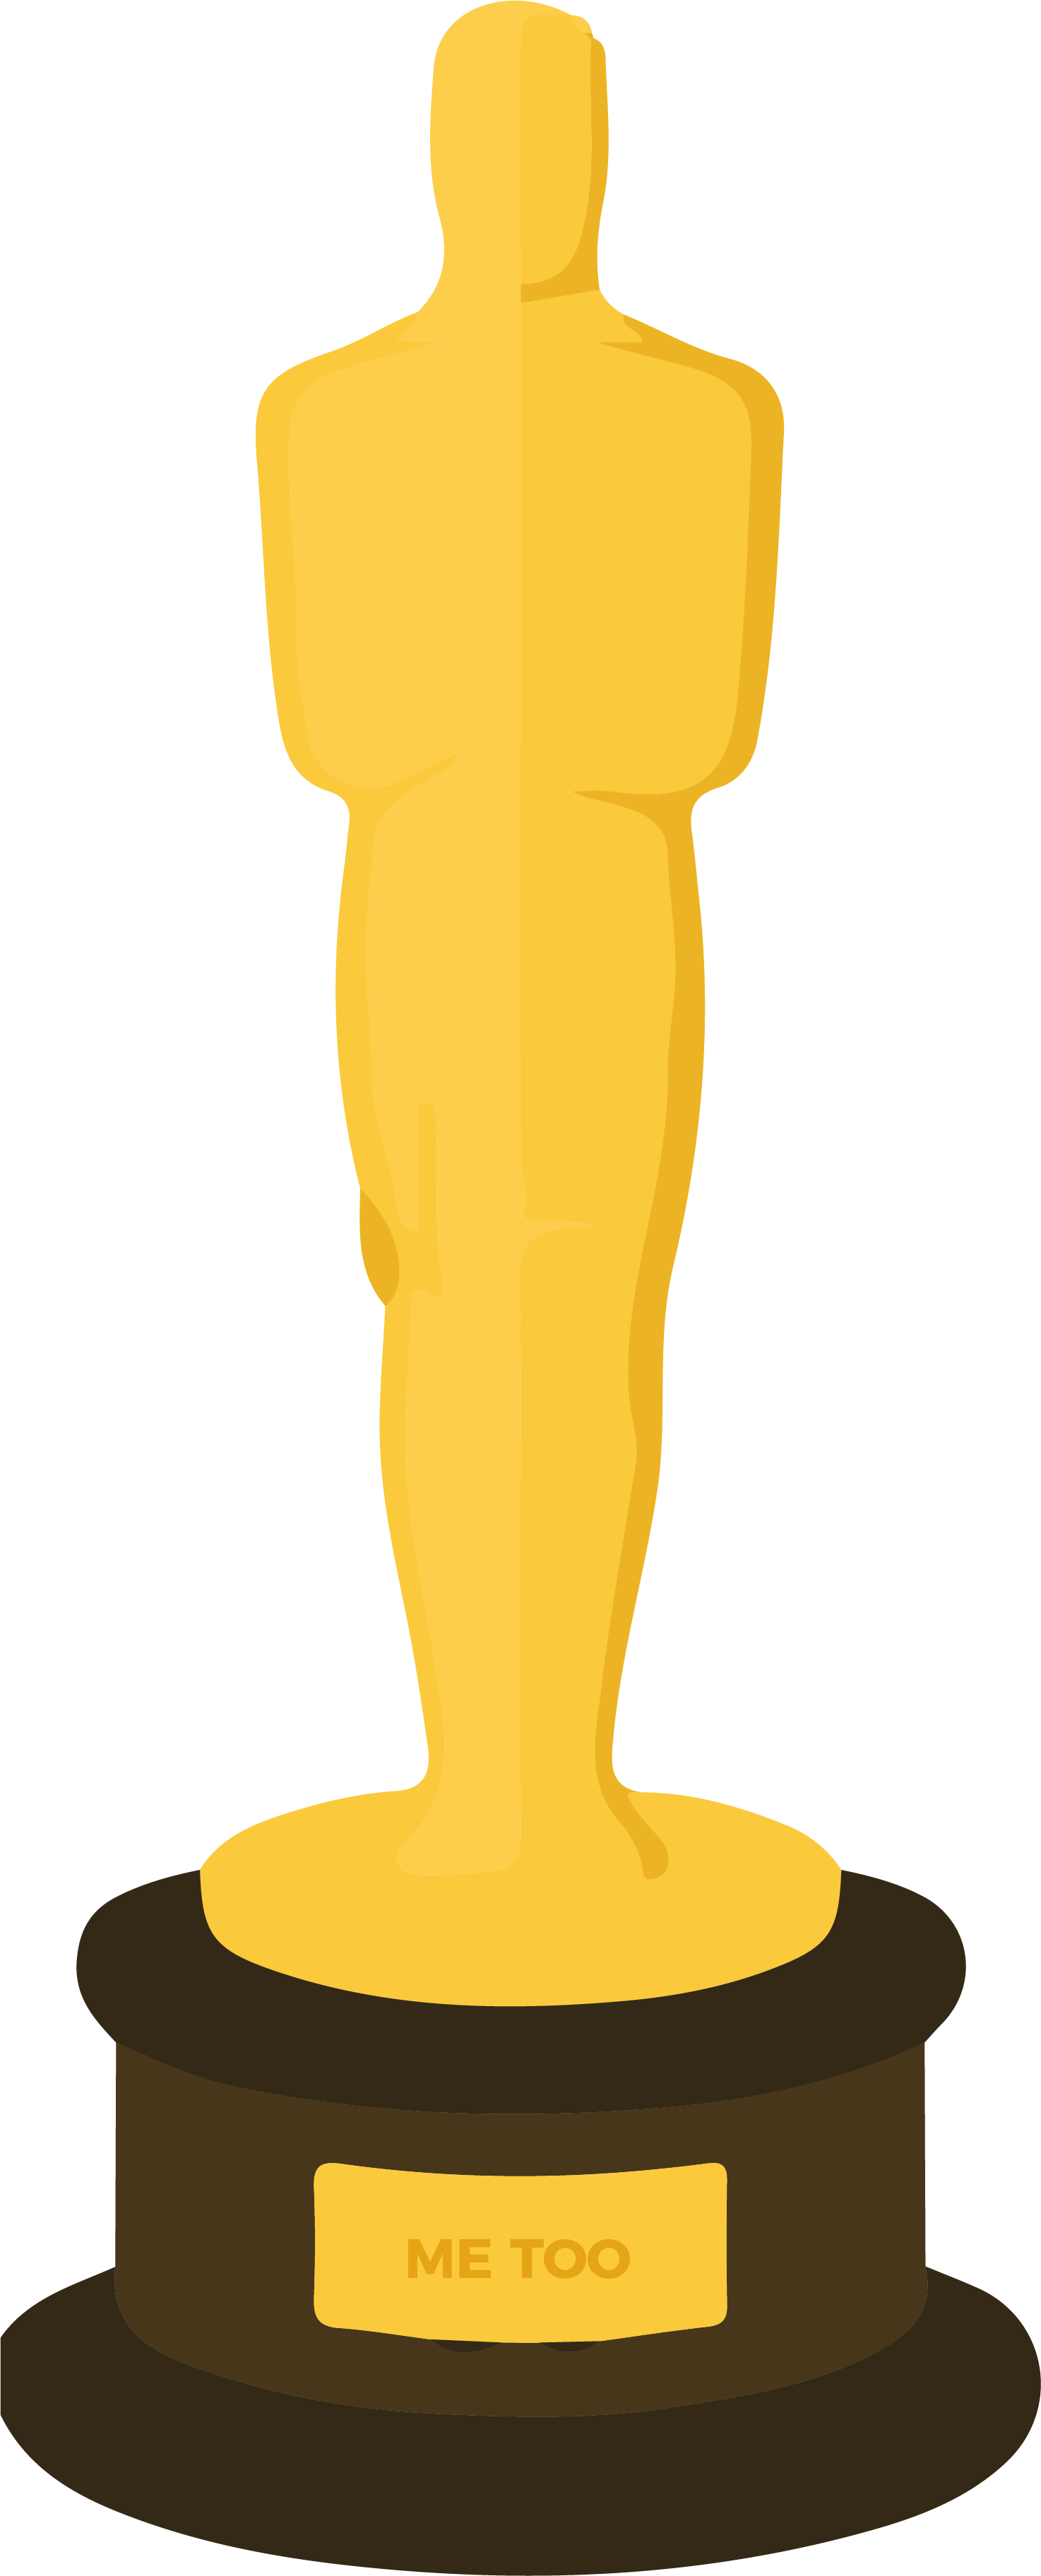 Academy Awards Computer Icons Clip art - the oscars png download - 1474